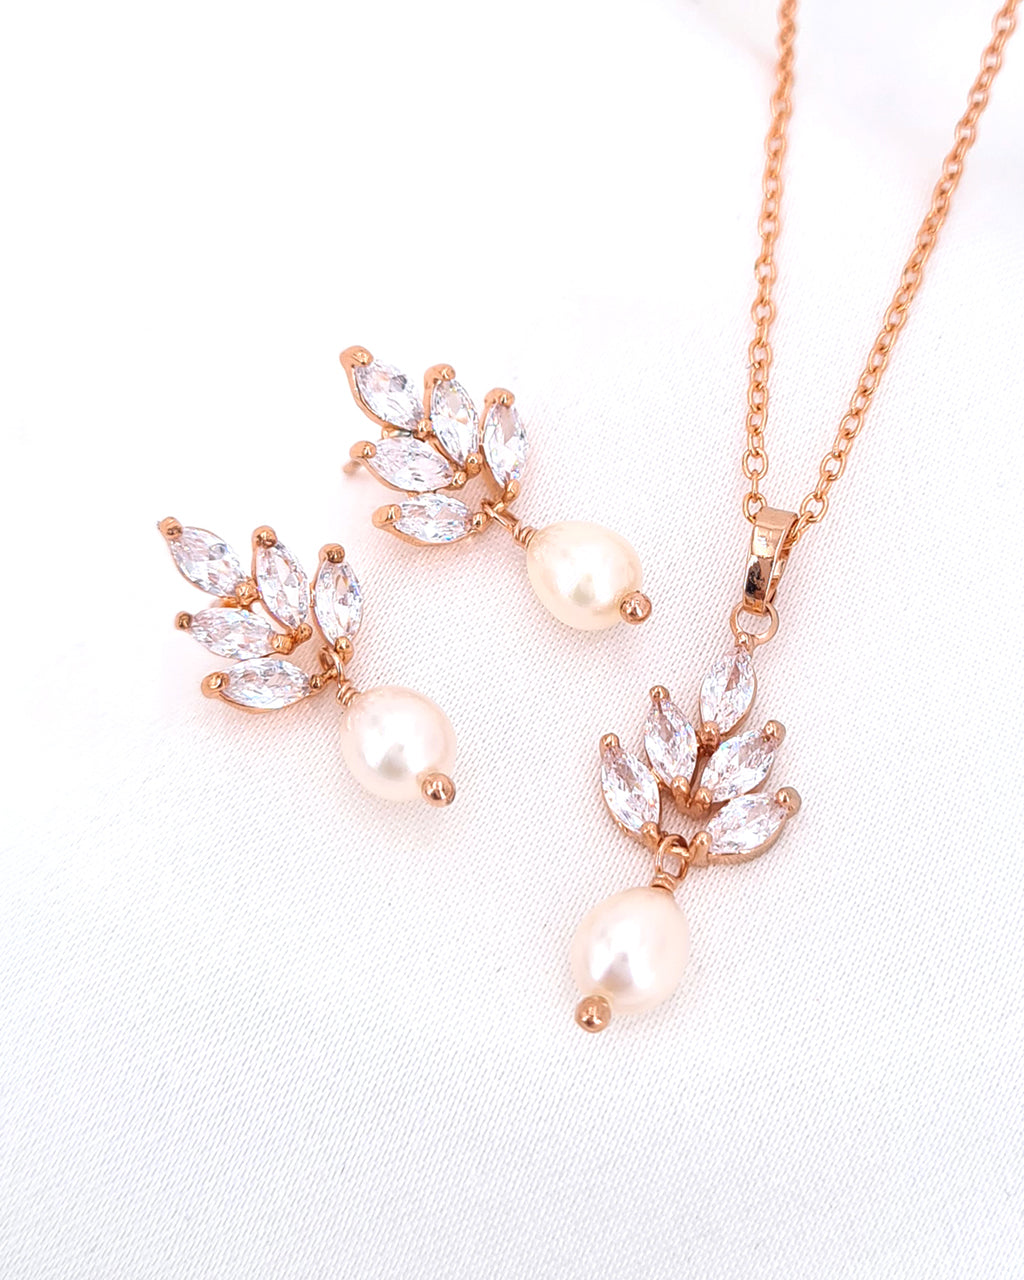 Rose Gold Dainty Freshwater Pearl Drop Earrings | Leaf Flower Design Earrings for Brides and Bridesmaids